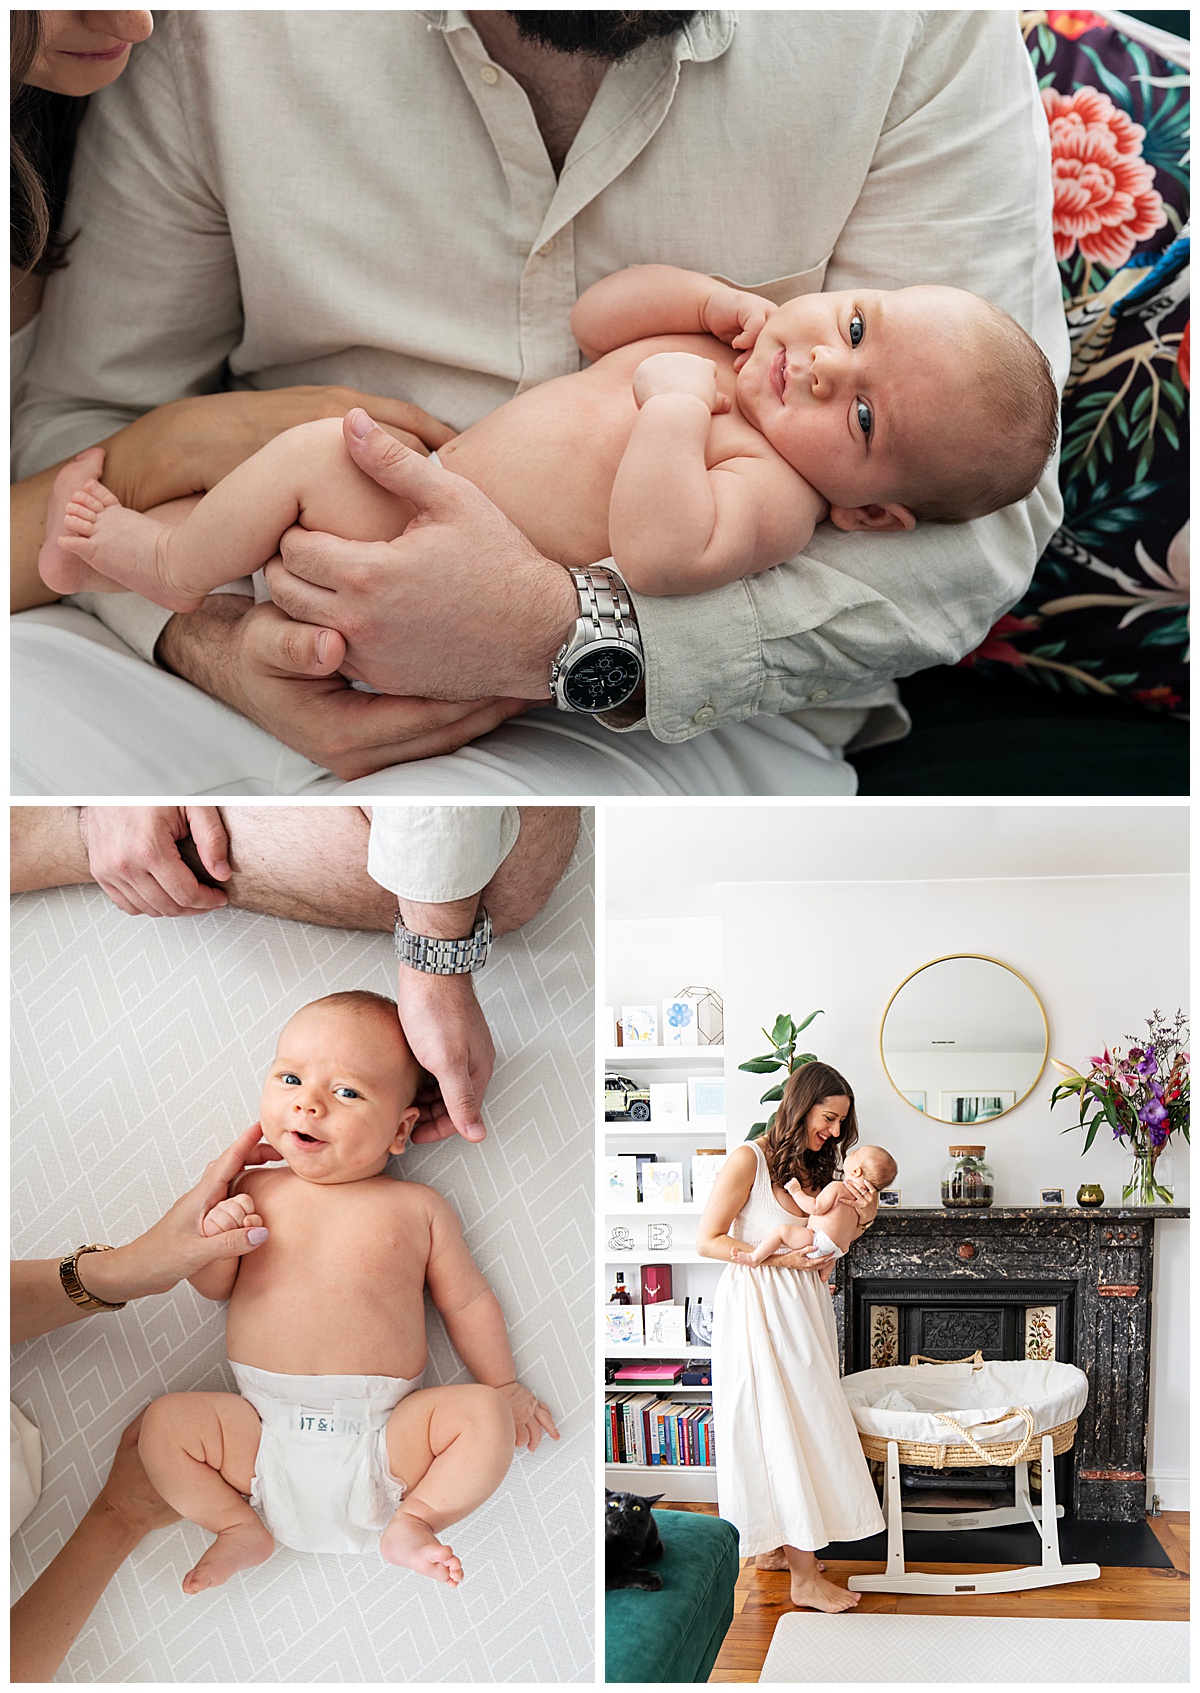 An almost 7 week old baby boy being held by is father during an at home newborn photo shoot. Photo shows its never too late to have a newborn photo shoot.
